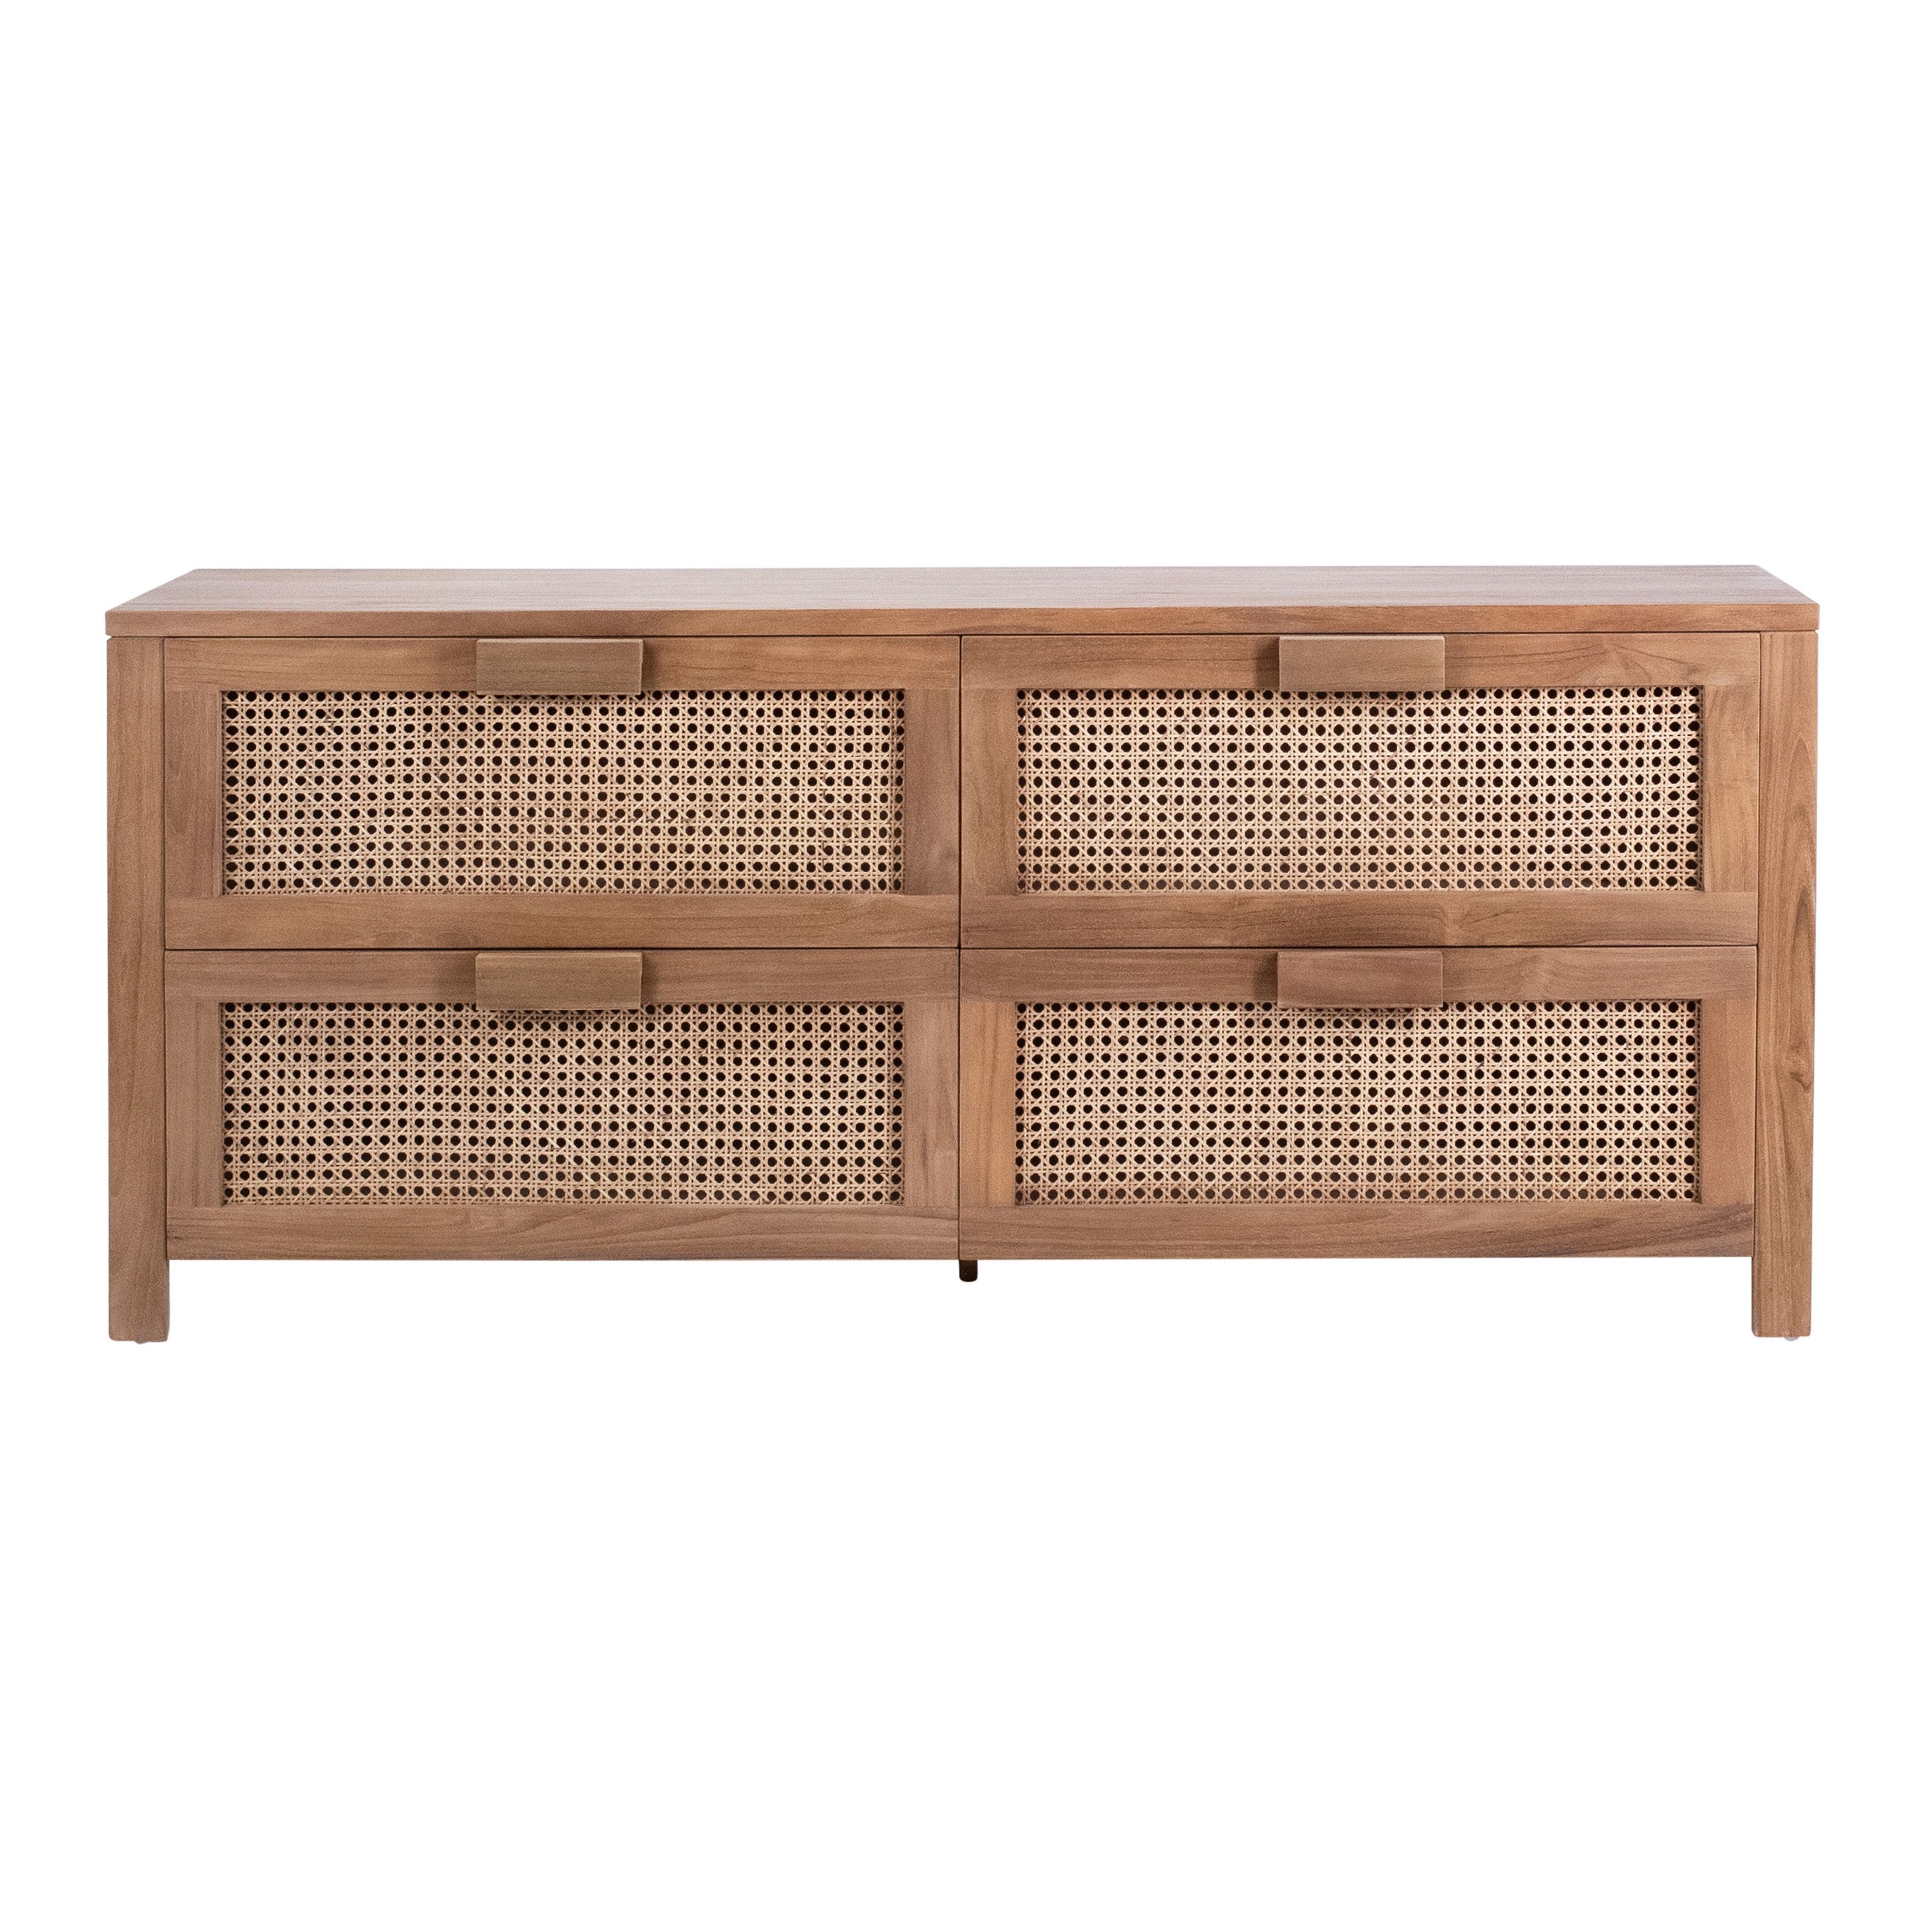 Elliana 63-inch Teak and Natural a - Sideboard in Finish Bath Bed Woven 36910802 4-Drawer Beyond - & Rattan